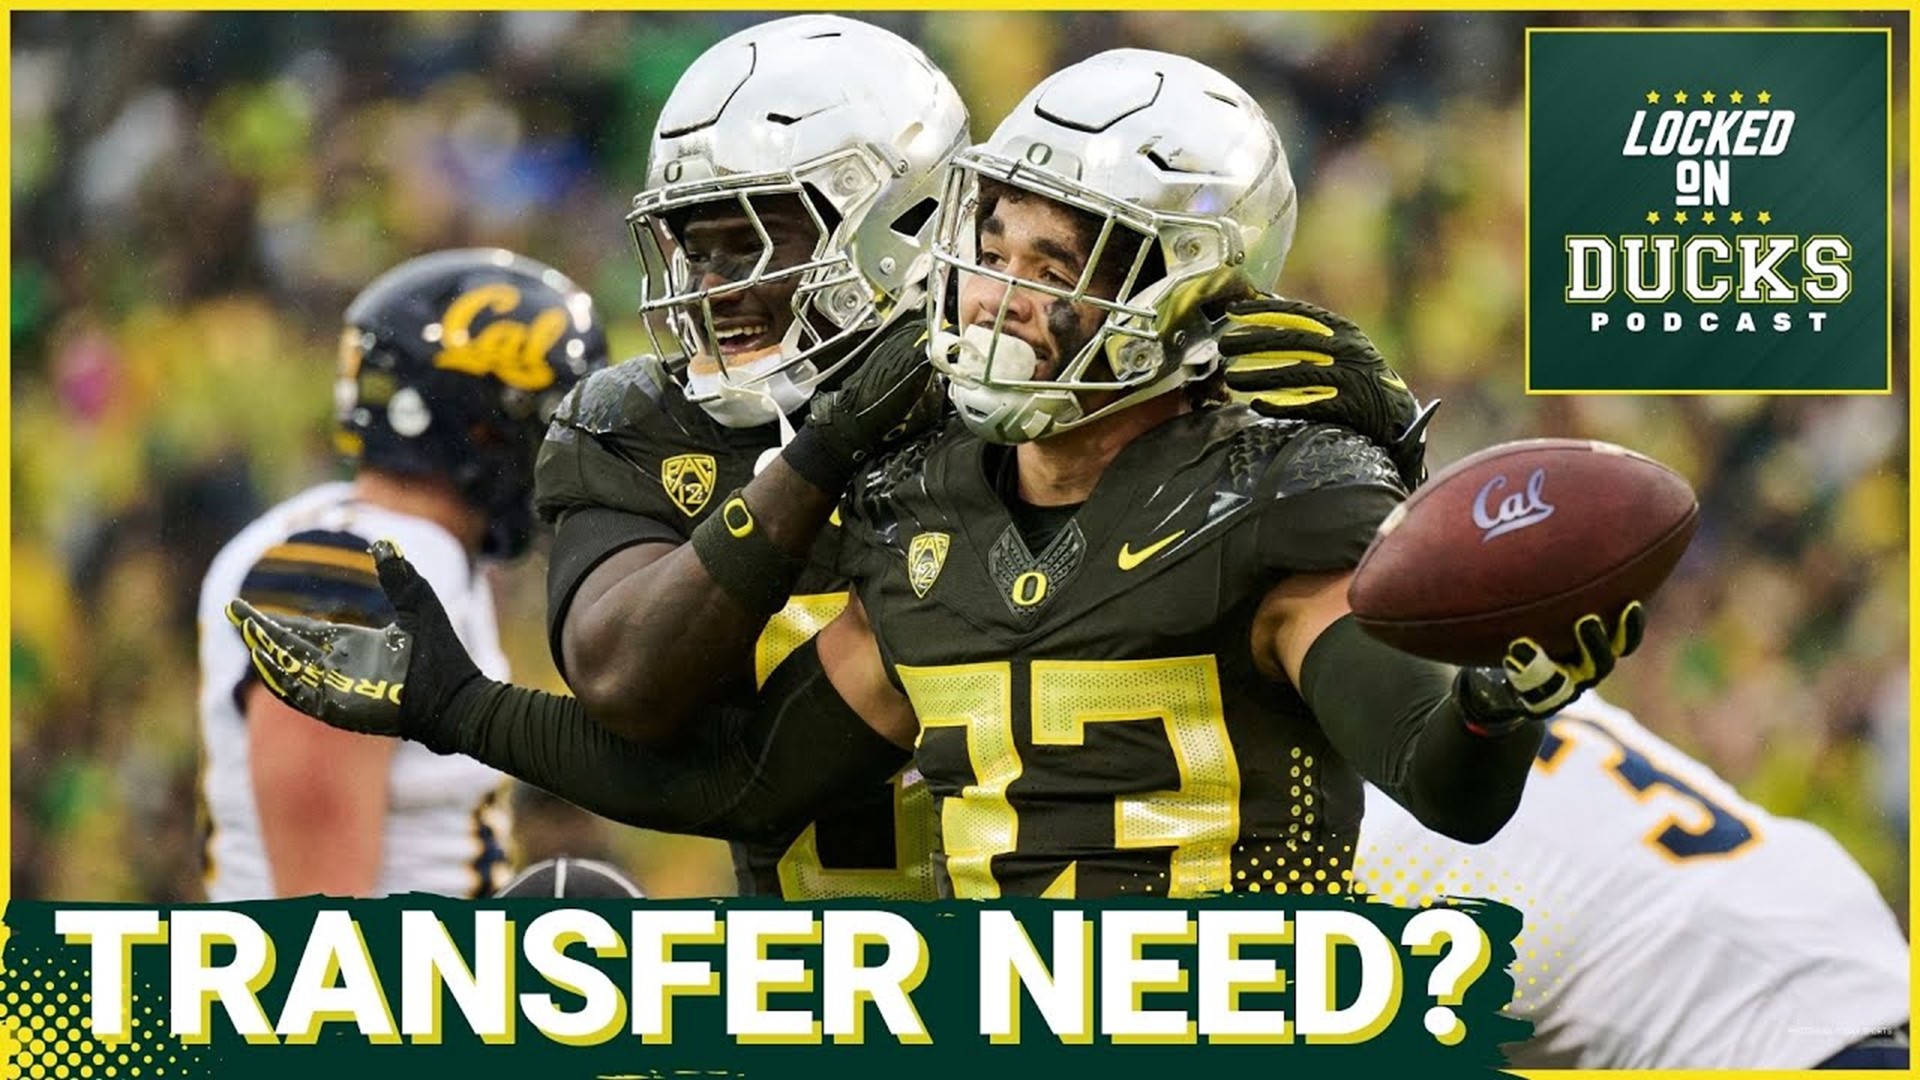 Oregon already has one of the best rosters in all of college football with a blend of returners, high school recruits, and impact transfers.